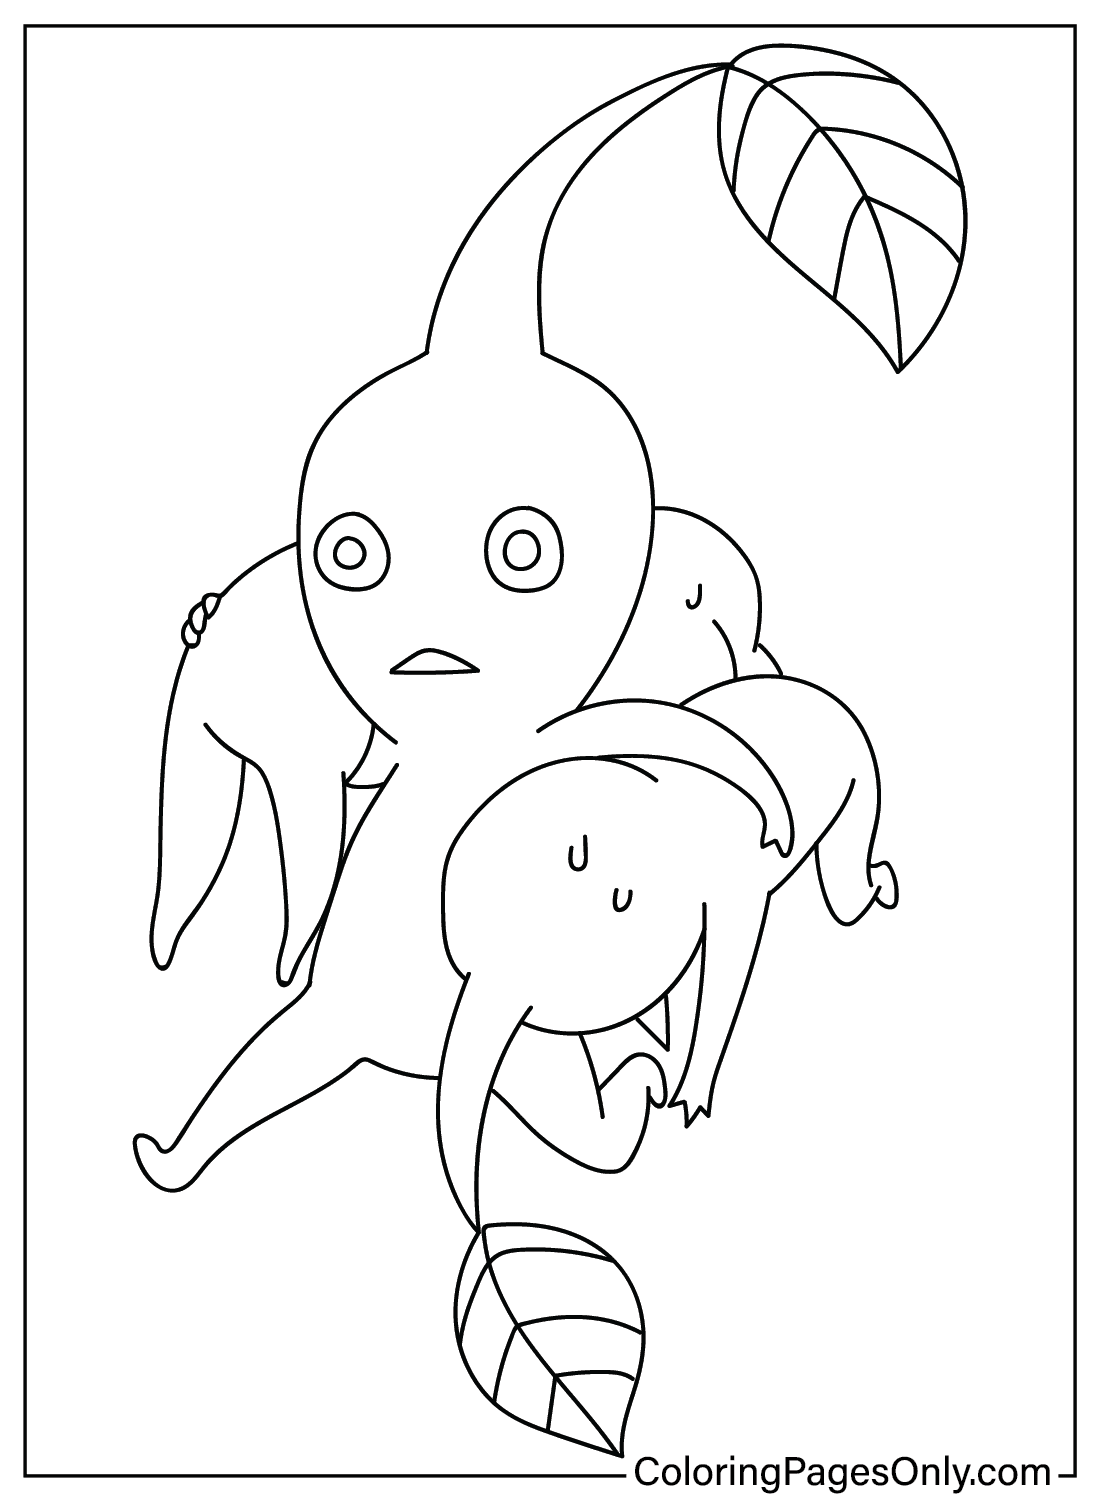 Pikmin Coloring Page Free Printable from Pikmin